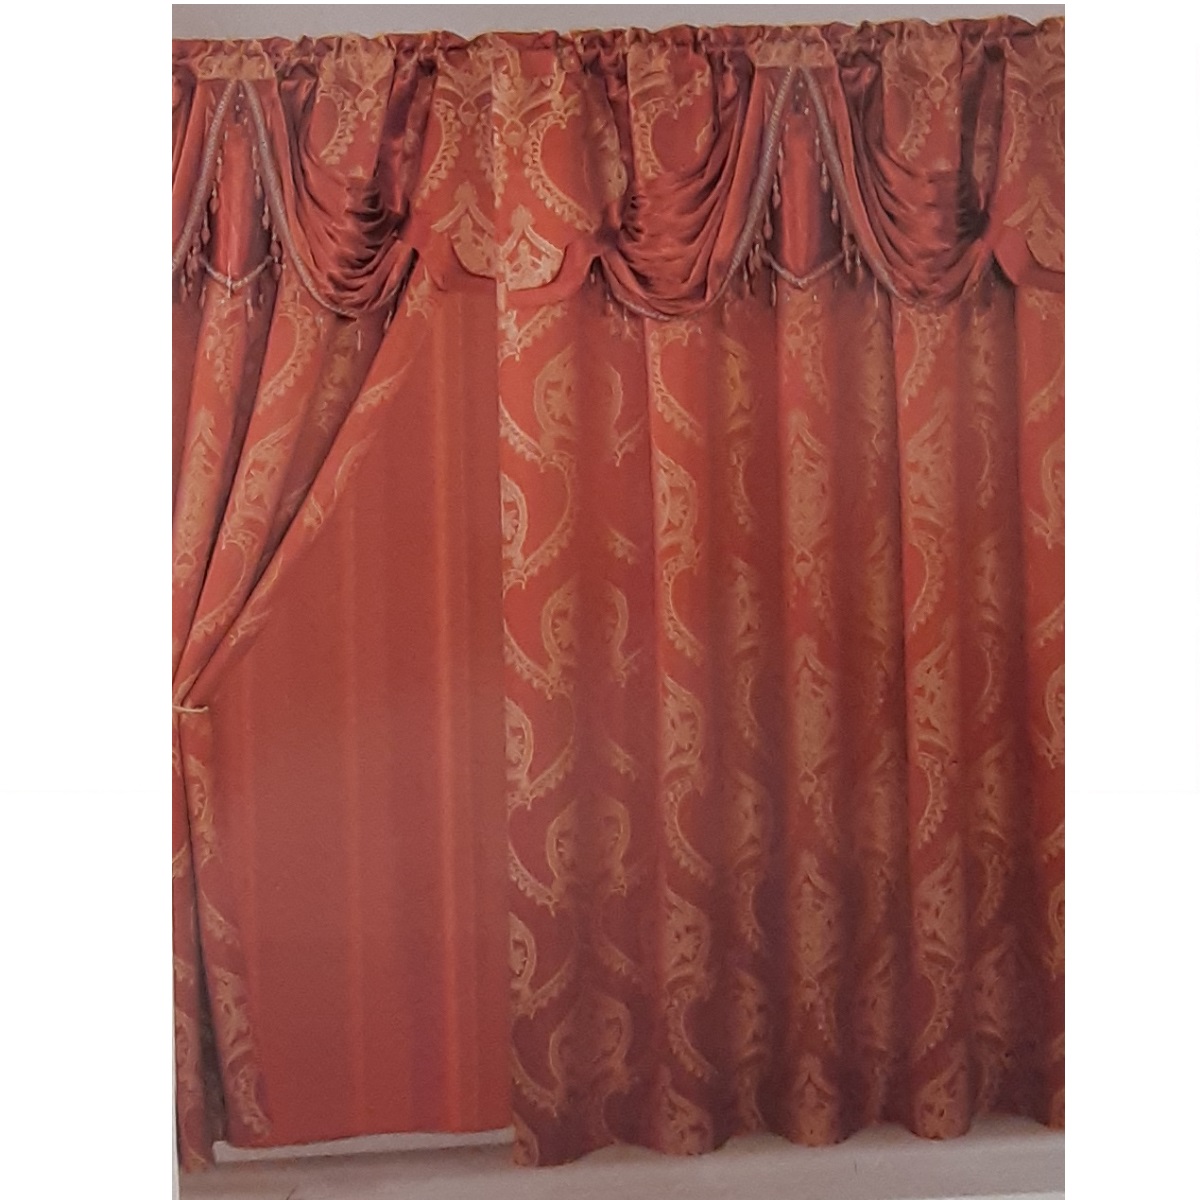 Windows Curtain Set Rust and Gold Drapes Bright curtains with liner and valance 